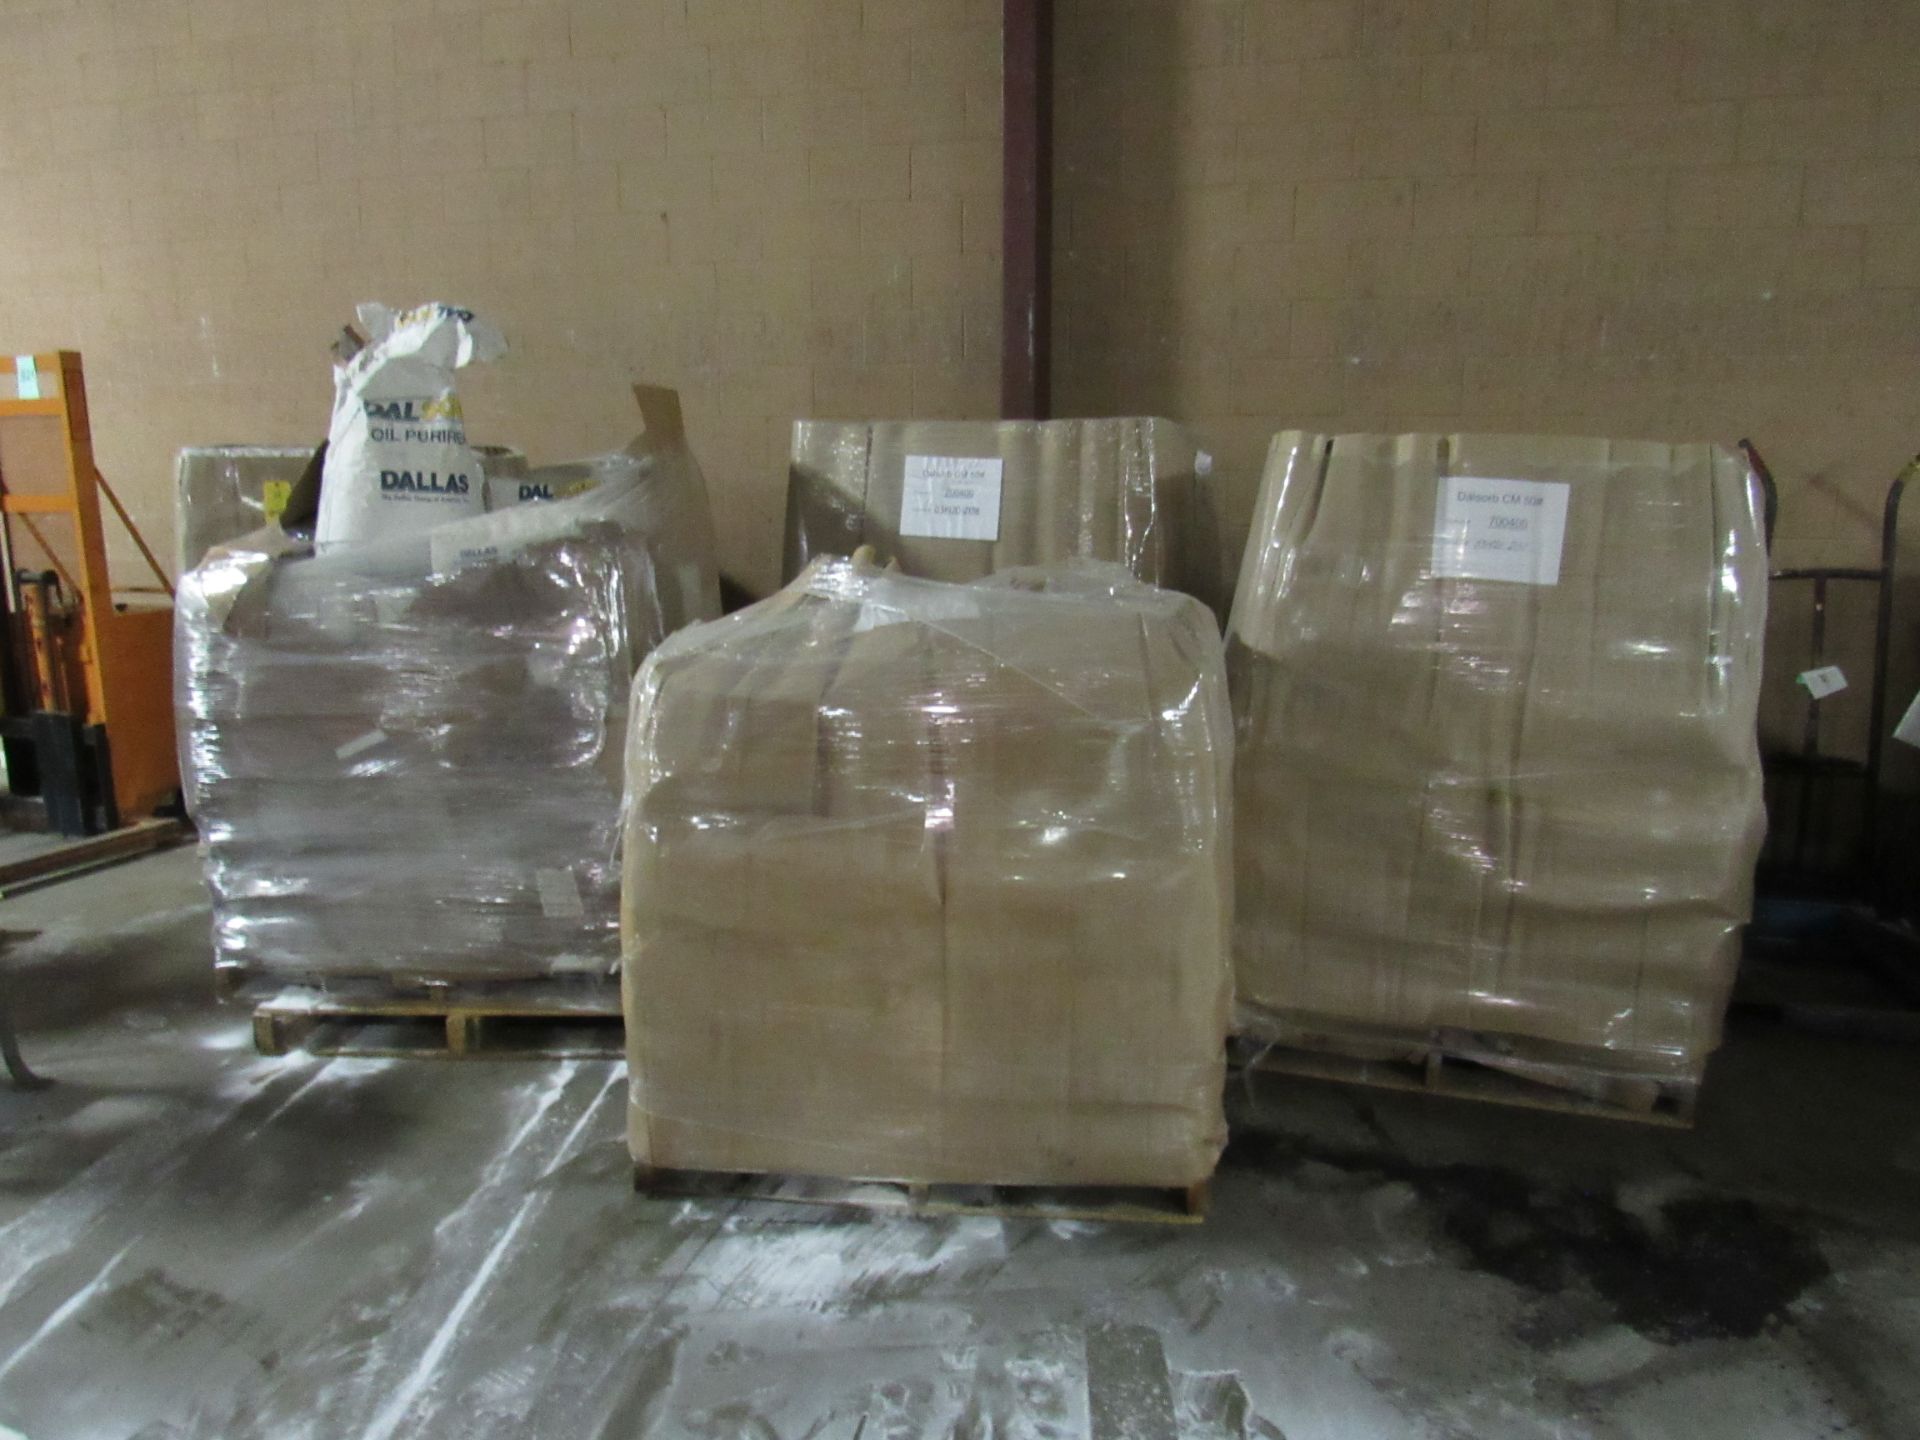 5 Pallets of DalSorb Oil Purifier -- -- Removal and loading free (LOCATED IN IOWA)***EUSA***